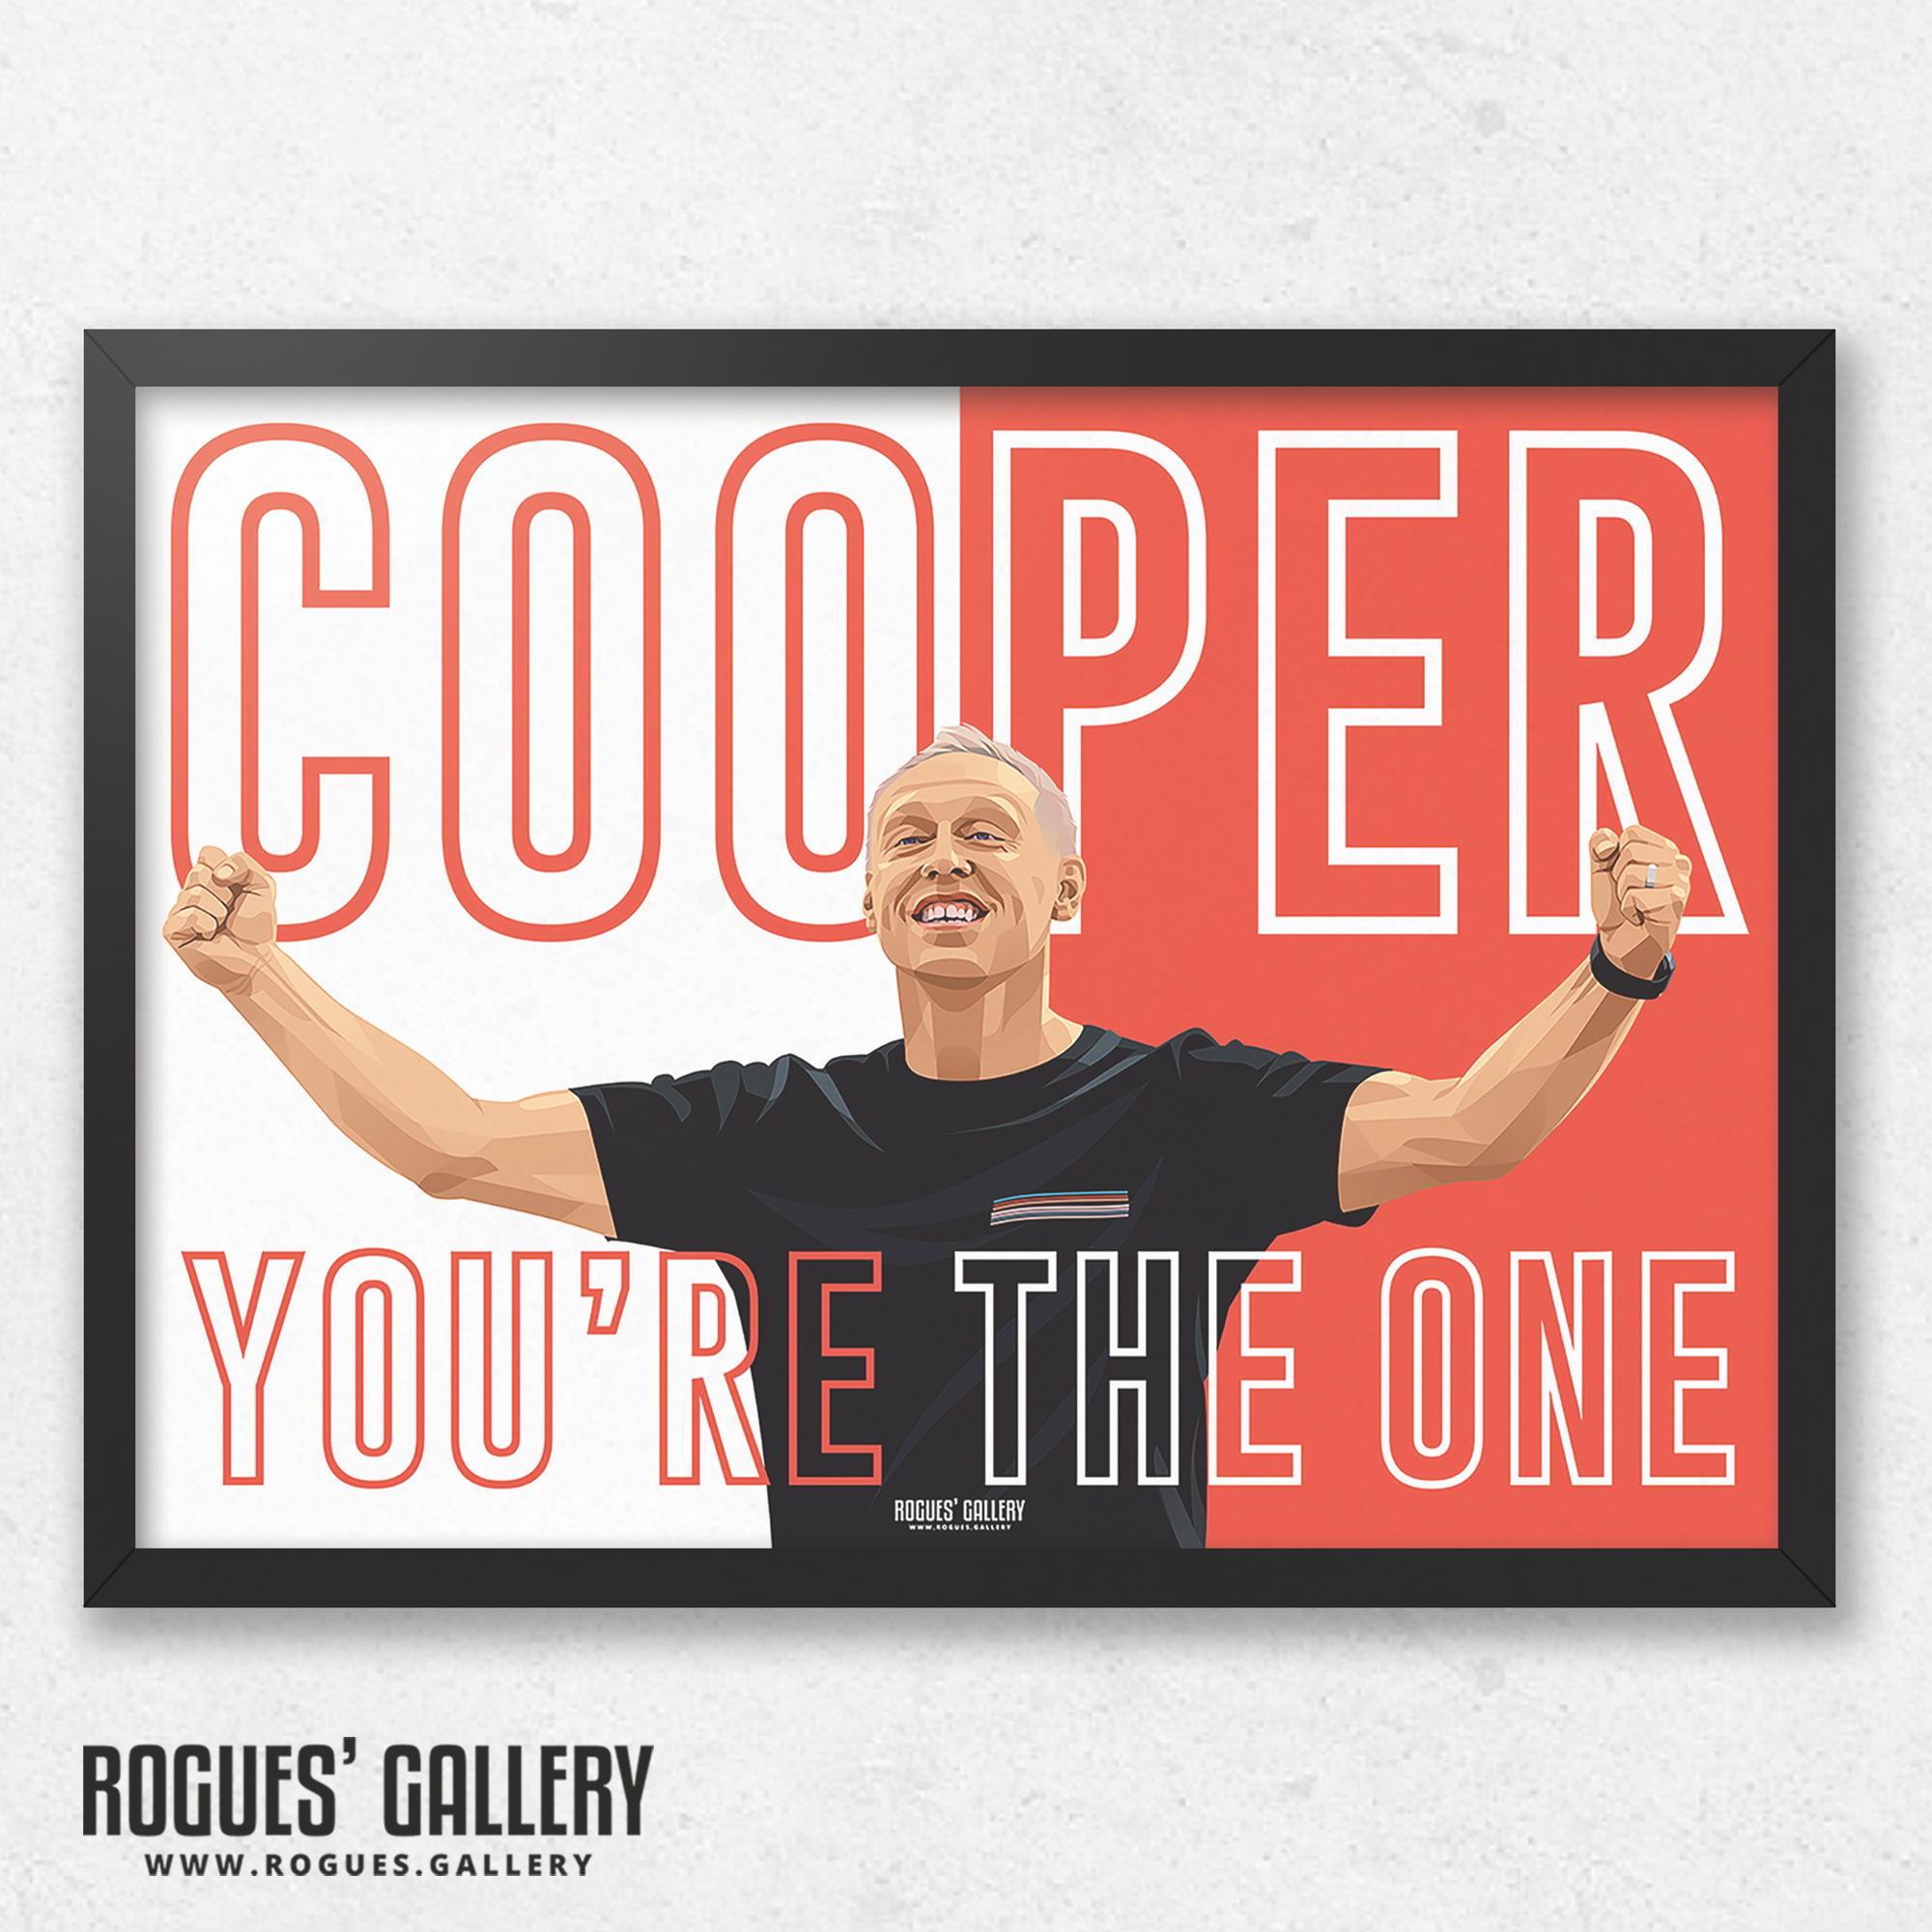 Steve Cooper Nottingham Forest boss you're the one A3 print